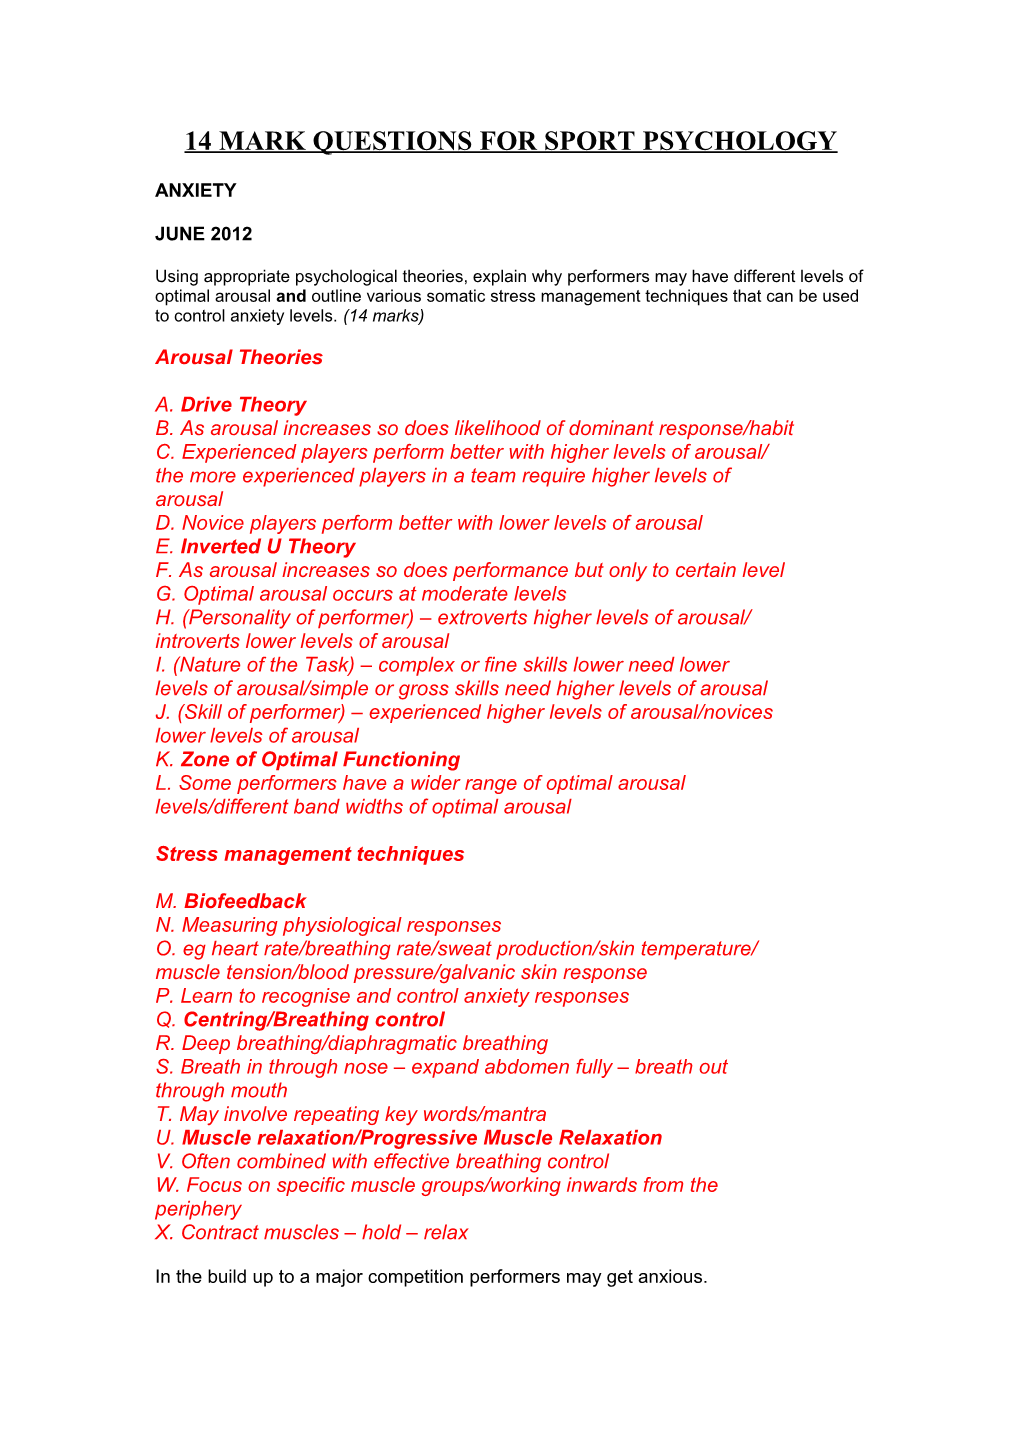 14 Mark Questions for Sport Psychology